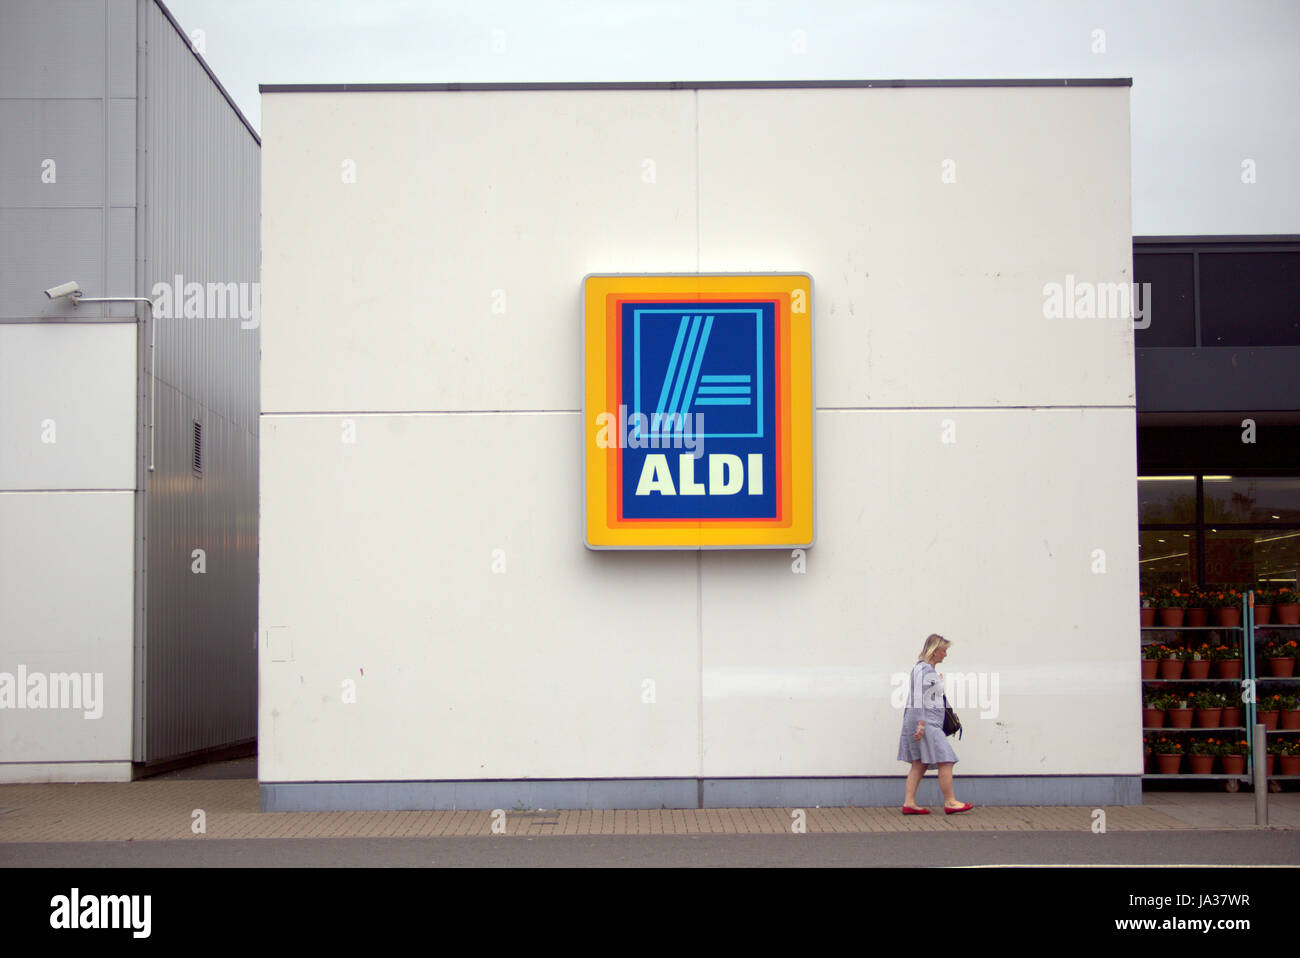 Aldi supermarket logo with customers walking by Stock Photo